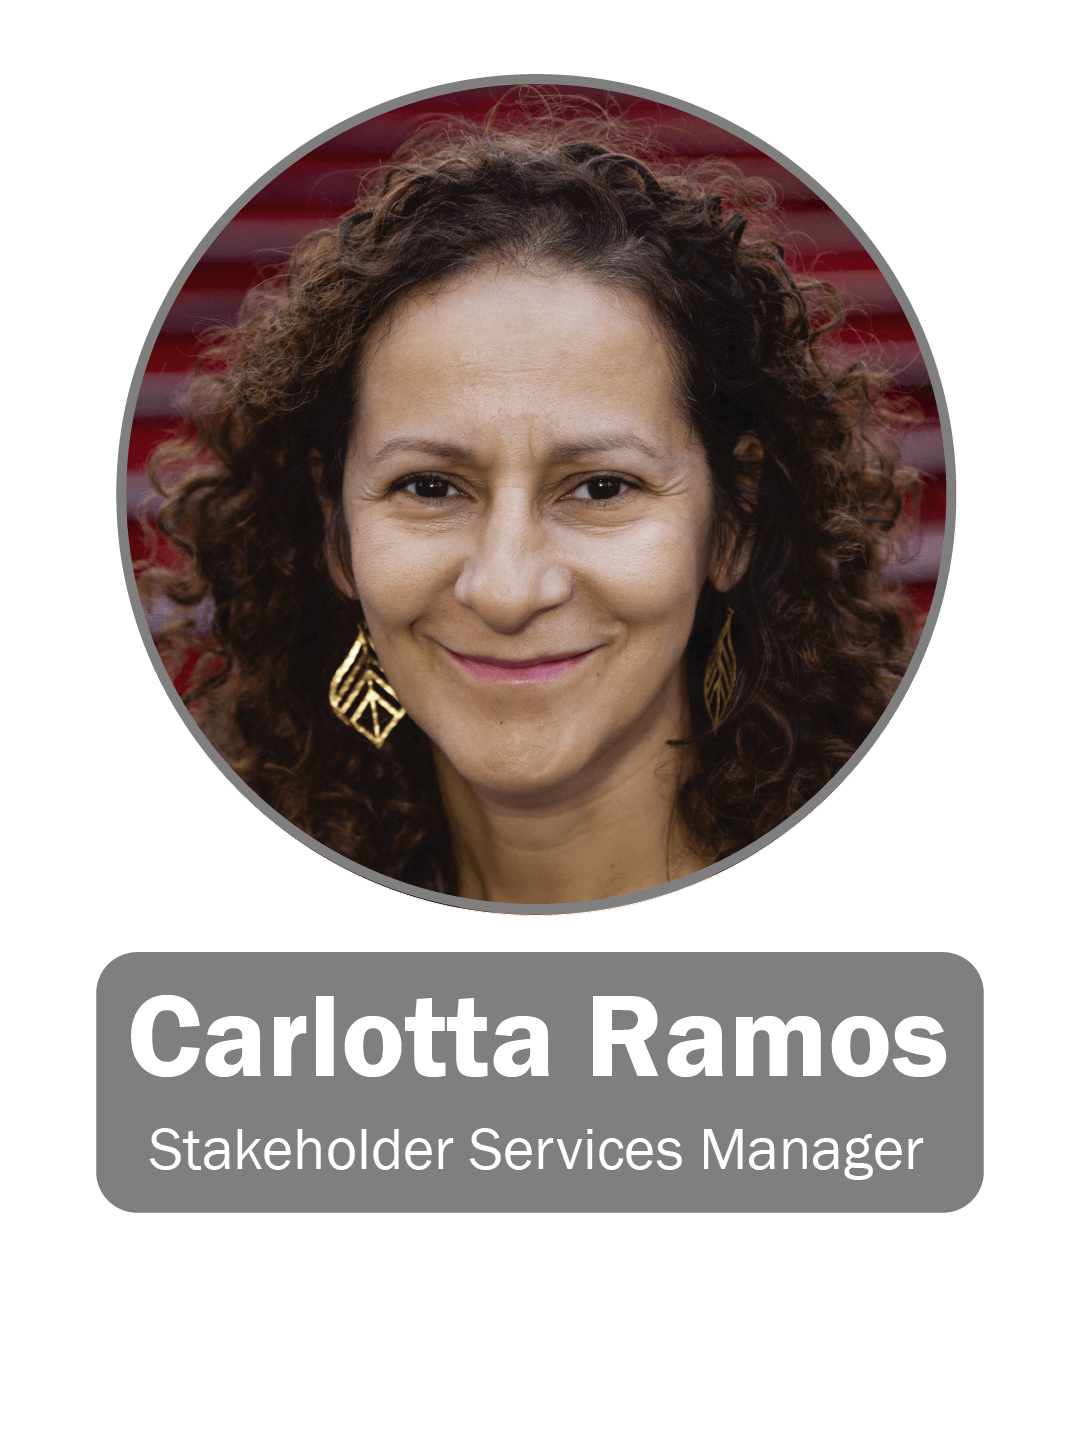 Carlotta Ramos | Stakeholder Services Manager